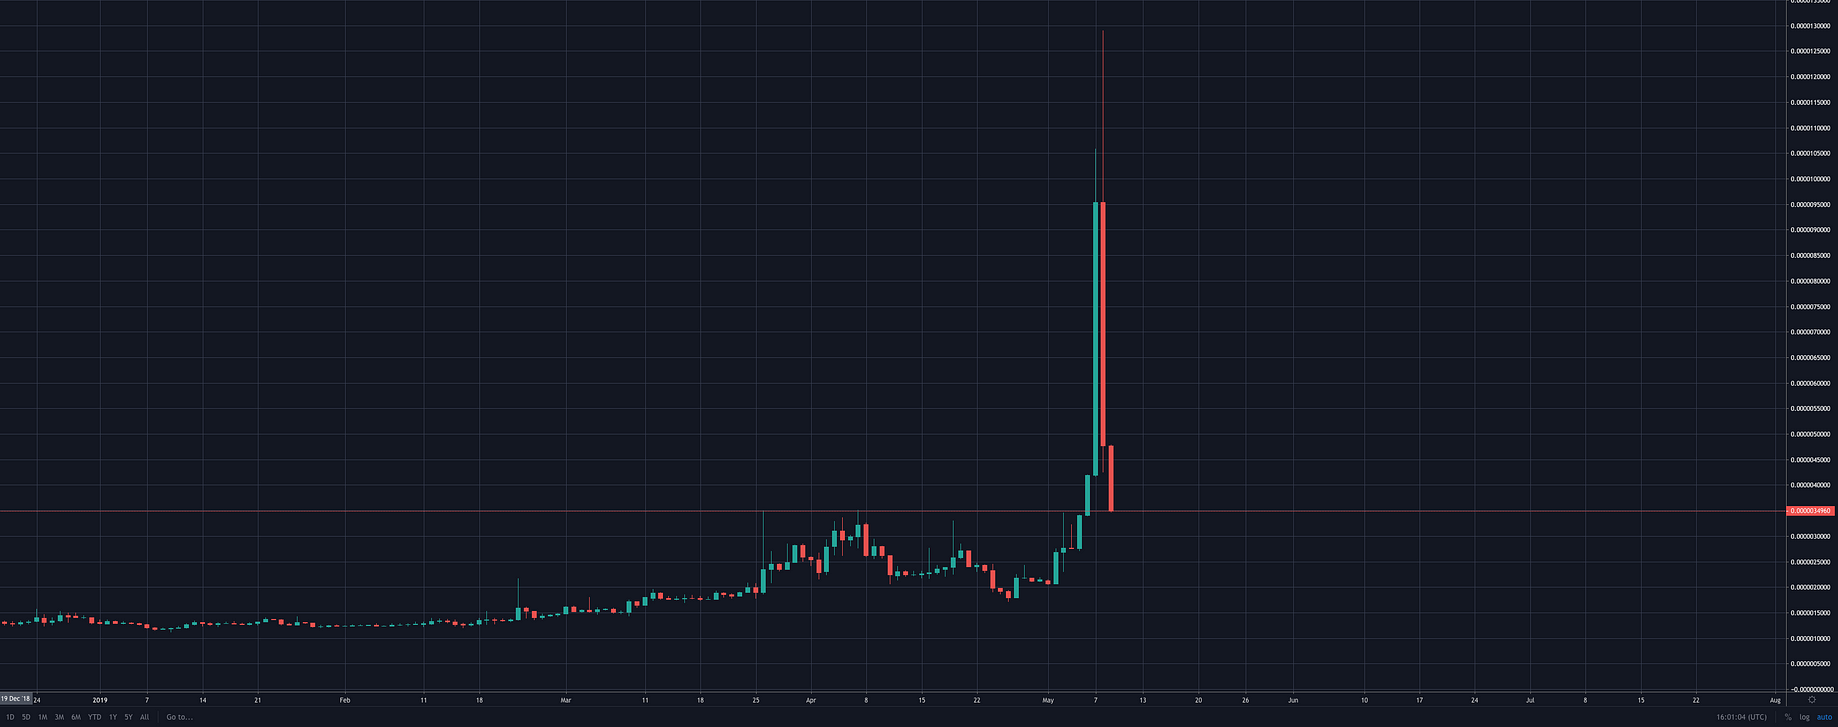 crypto pump and dumps